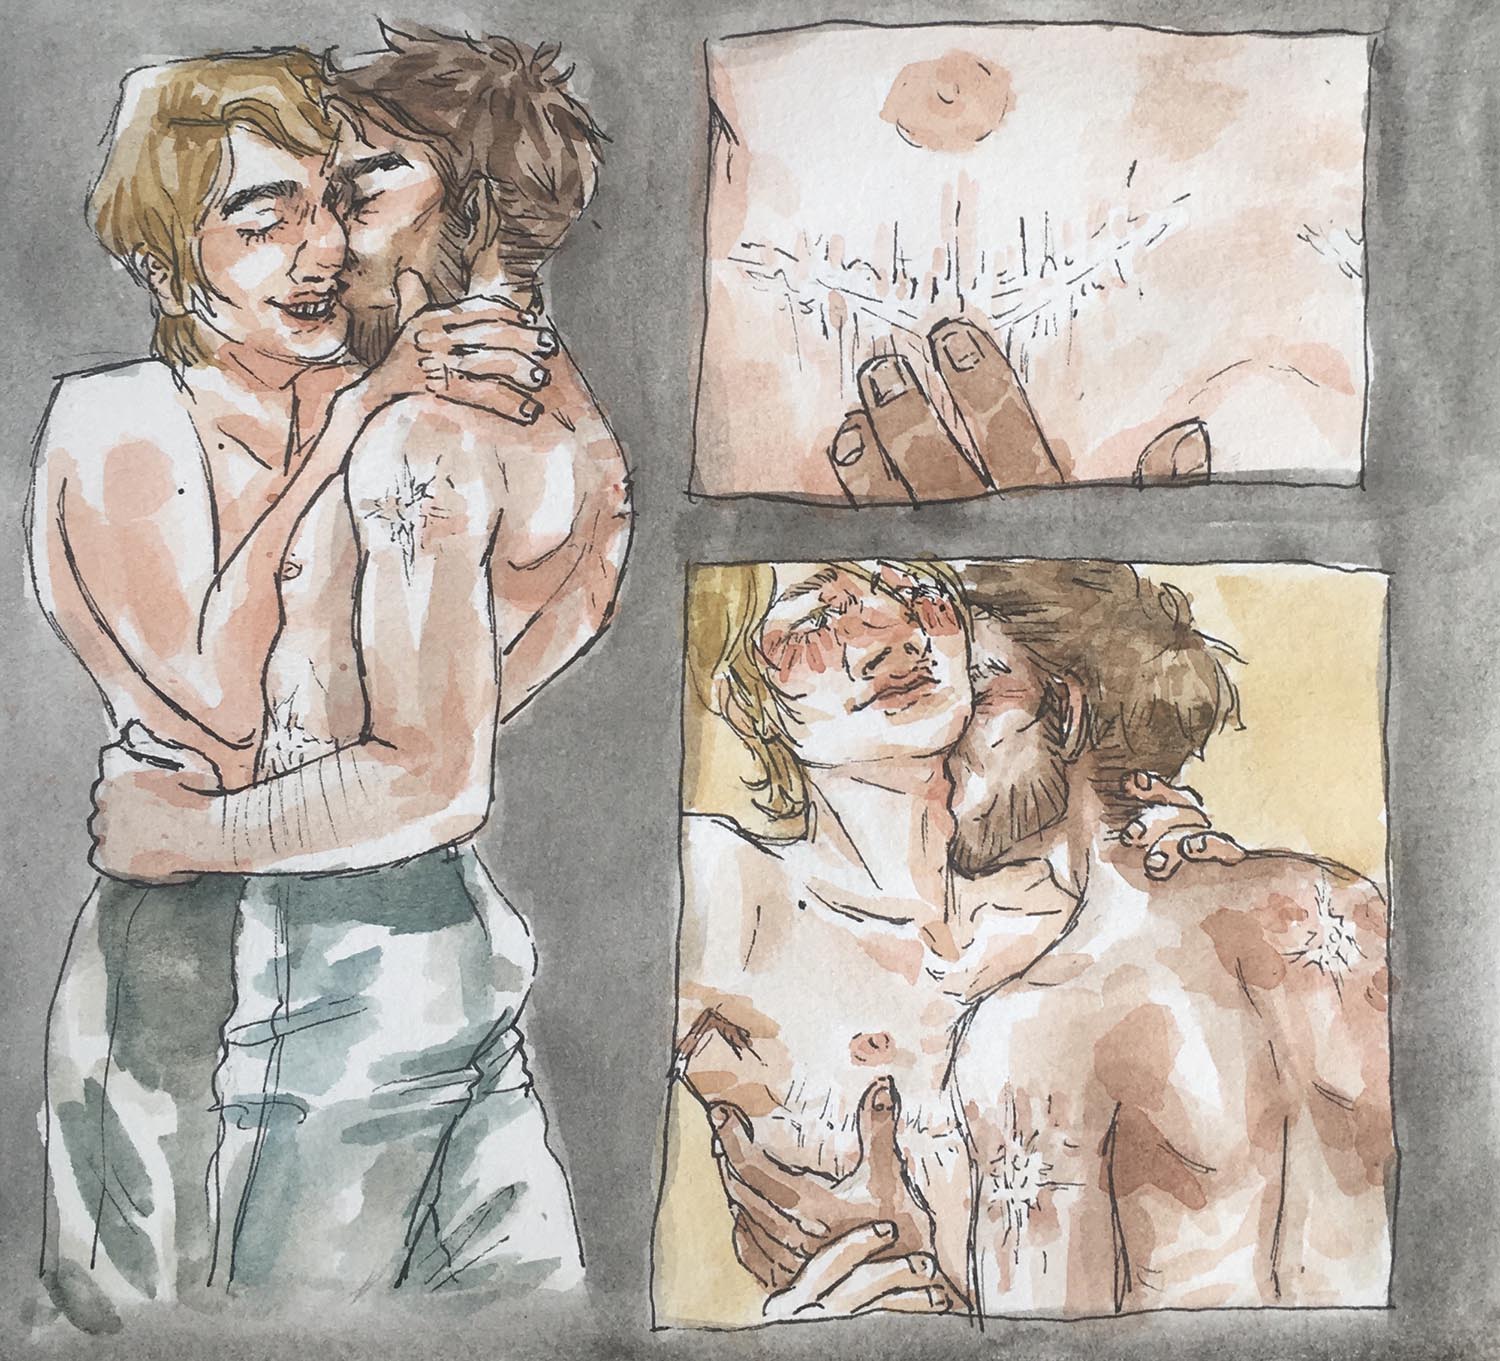 a blonde man (guy) and brunnete man (jeb) kissing while shirtles. to the right, two panels, top: jeb touching guy's chest scars, bottom: jeb kissing guy's neck